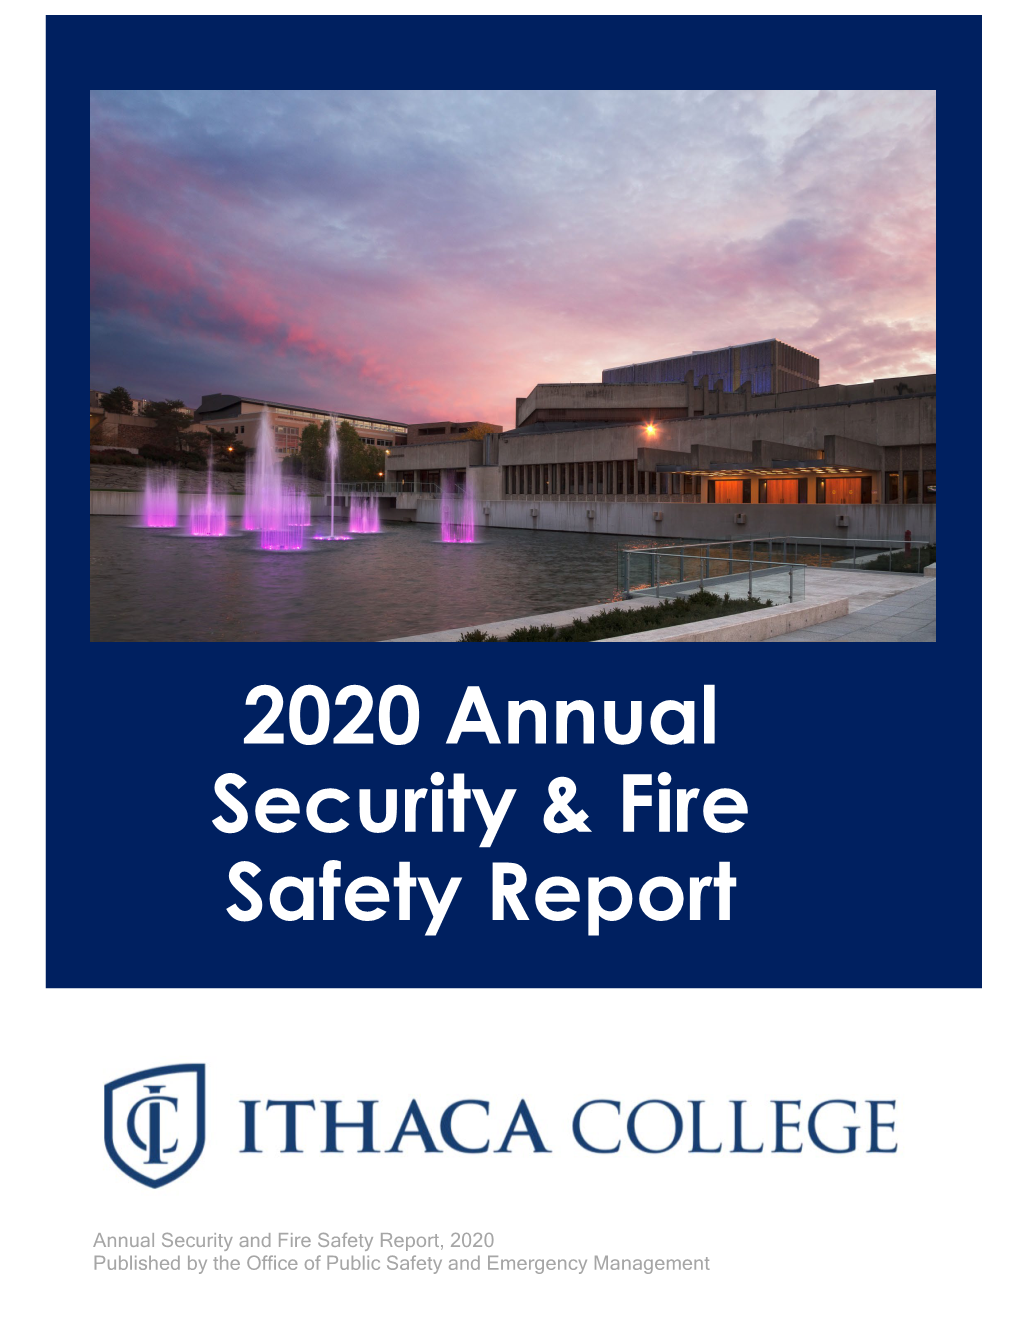 2020 Annual Security & Fire Safety Report